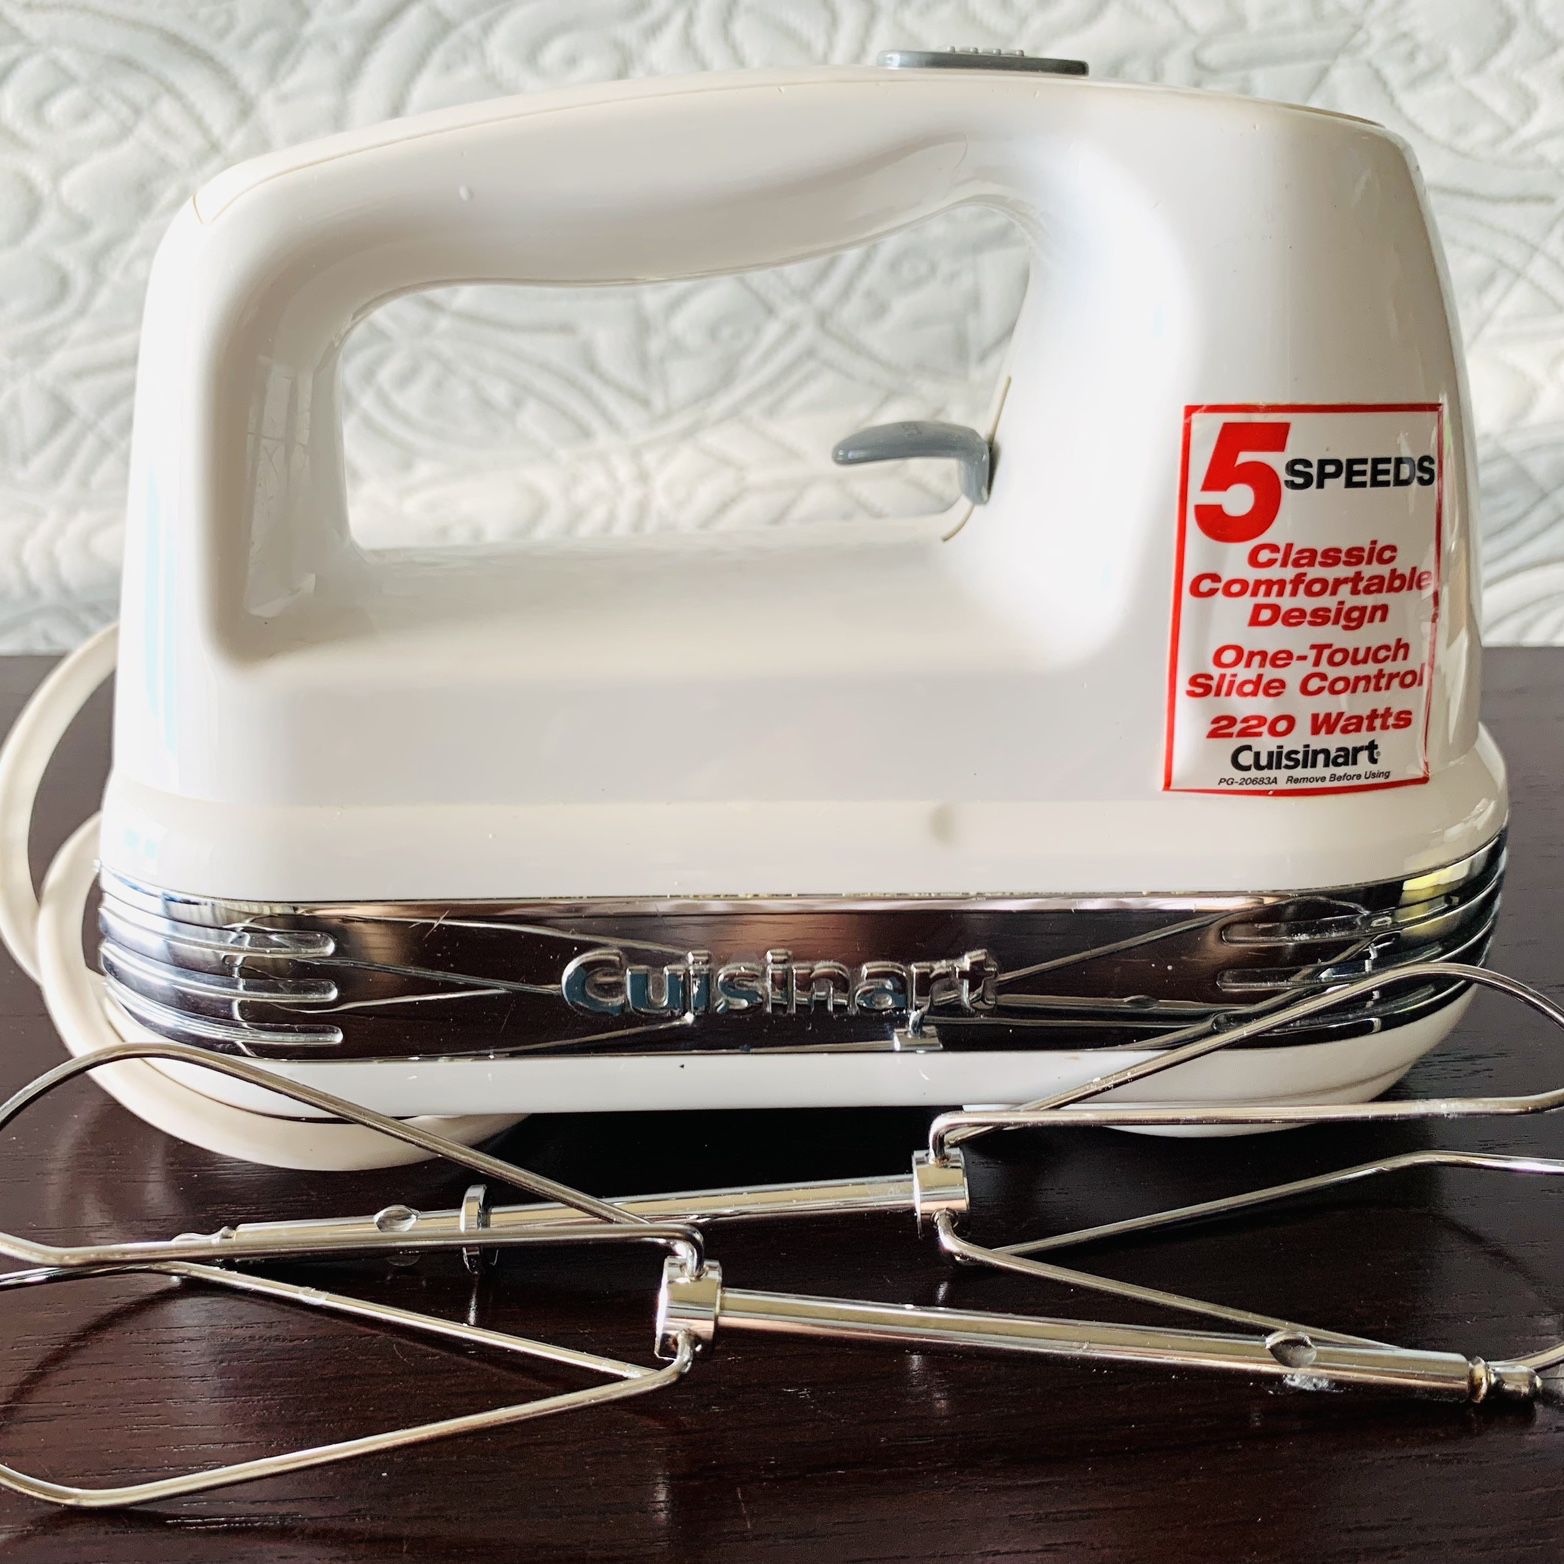 Cuisinart 5 Speed Hand Mixer Almost New for Sale in Chino Hills, CA -  OfferUp